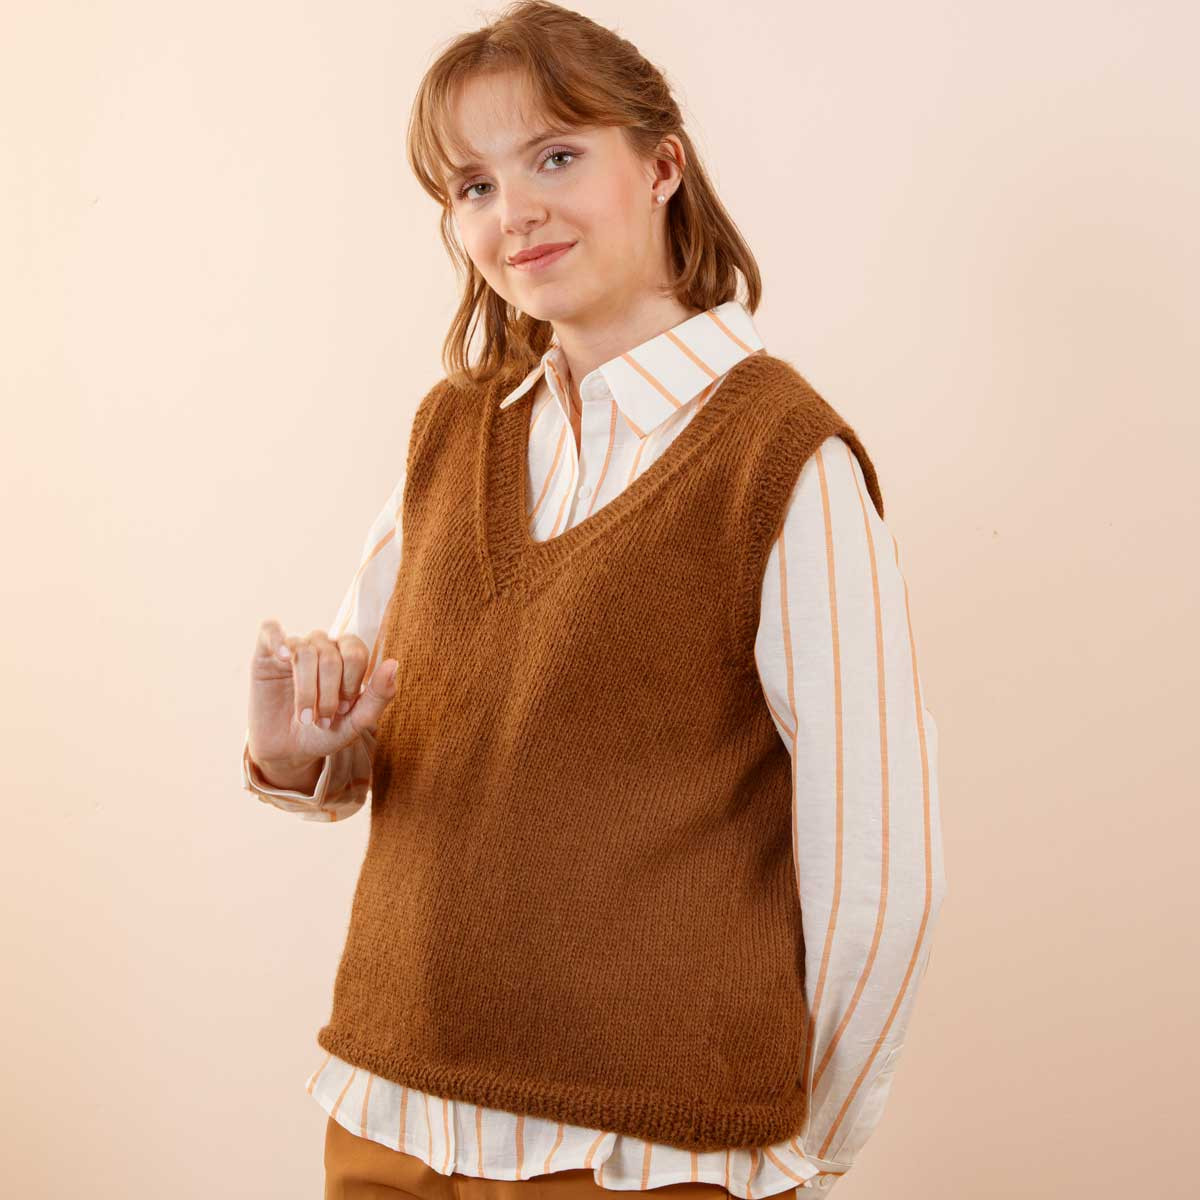 Dillénia ready-to-knit sweater